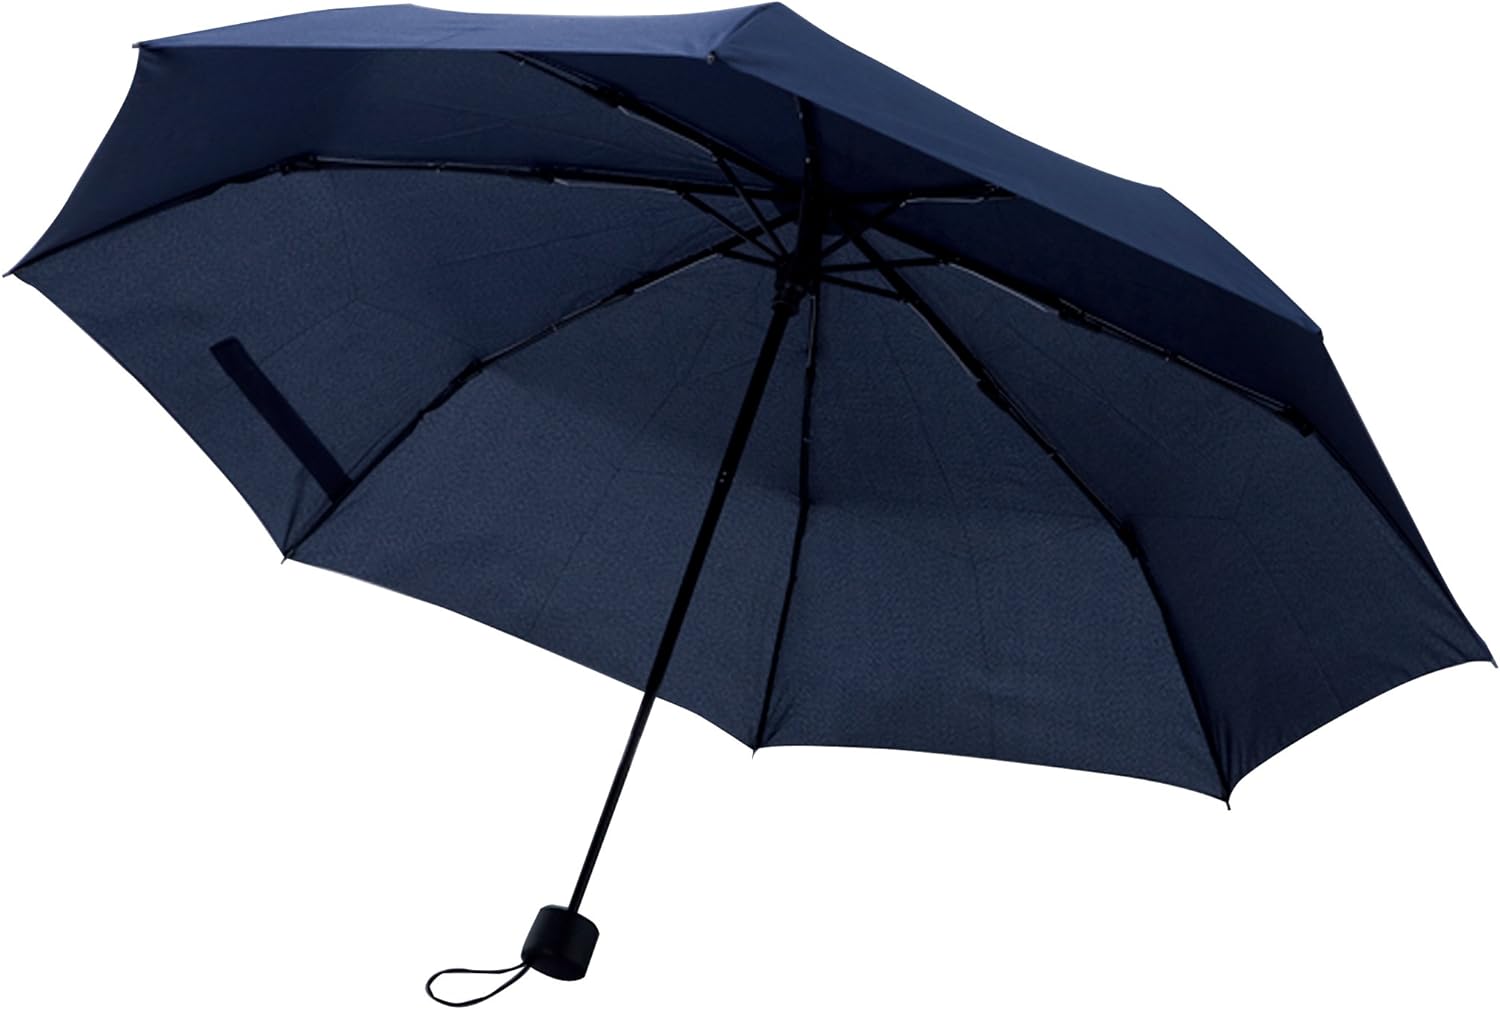 Fully Automatic Double Layer Windproof Rain Umbrella for Men and Women